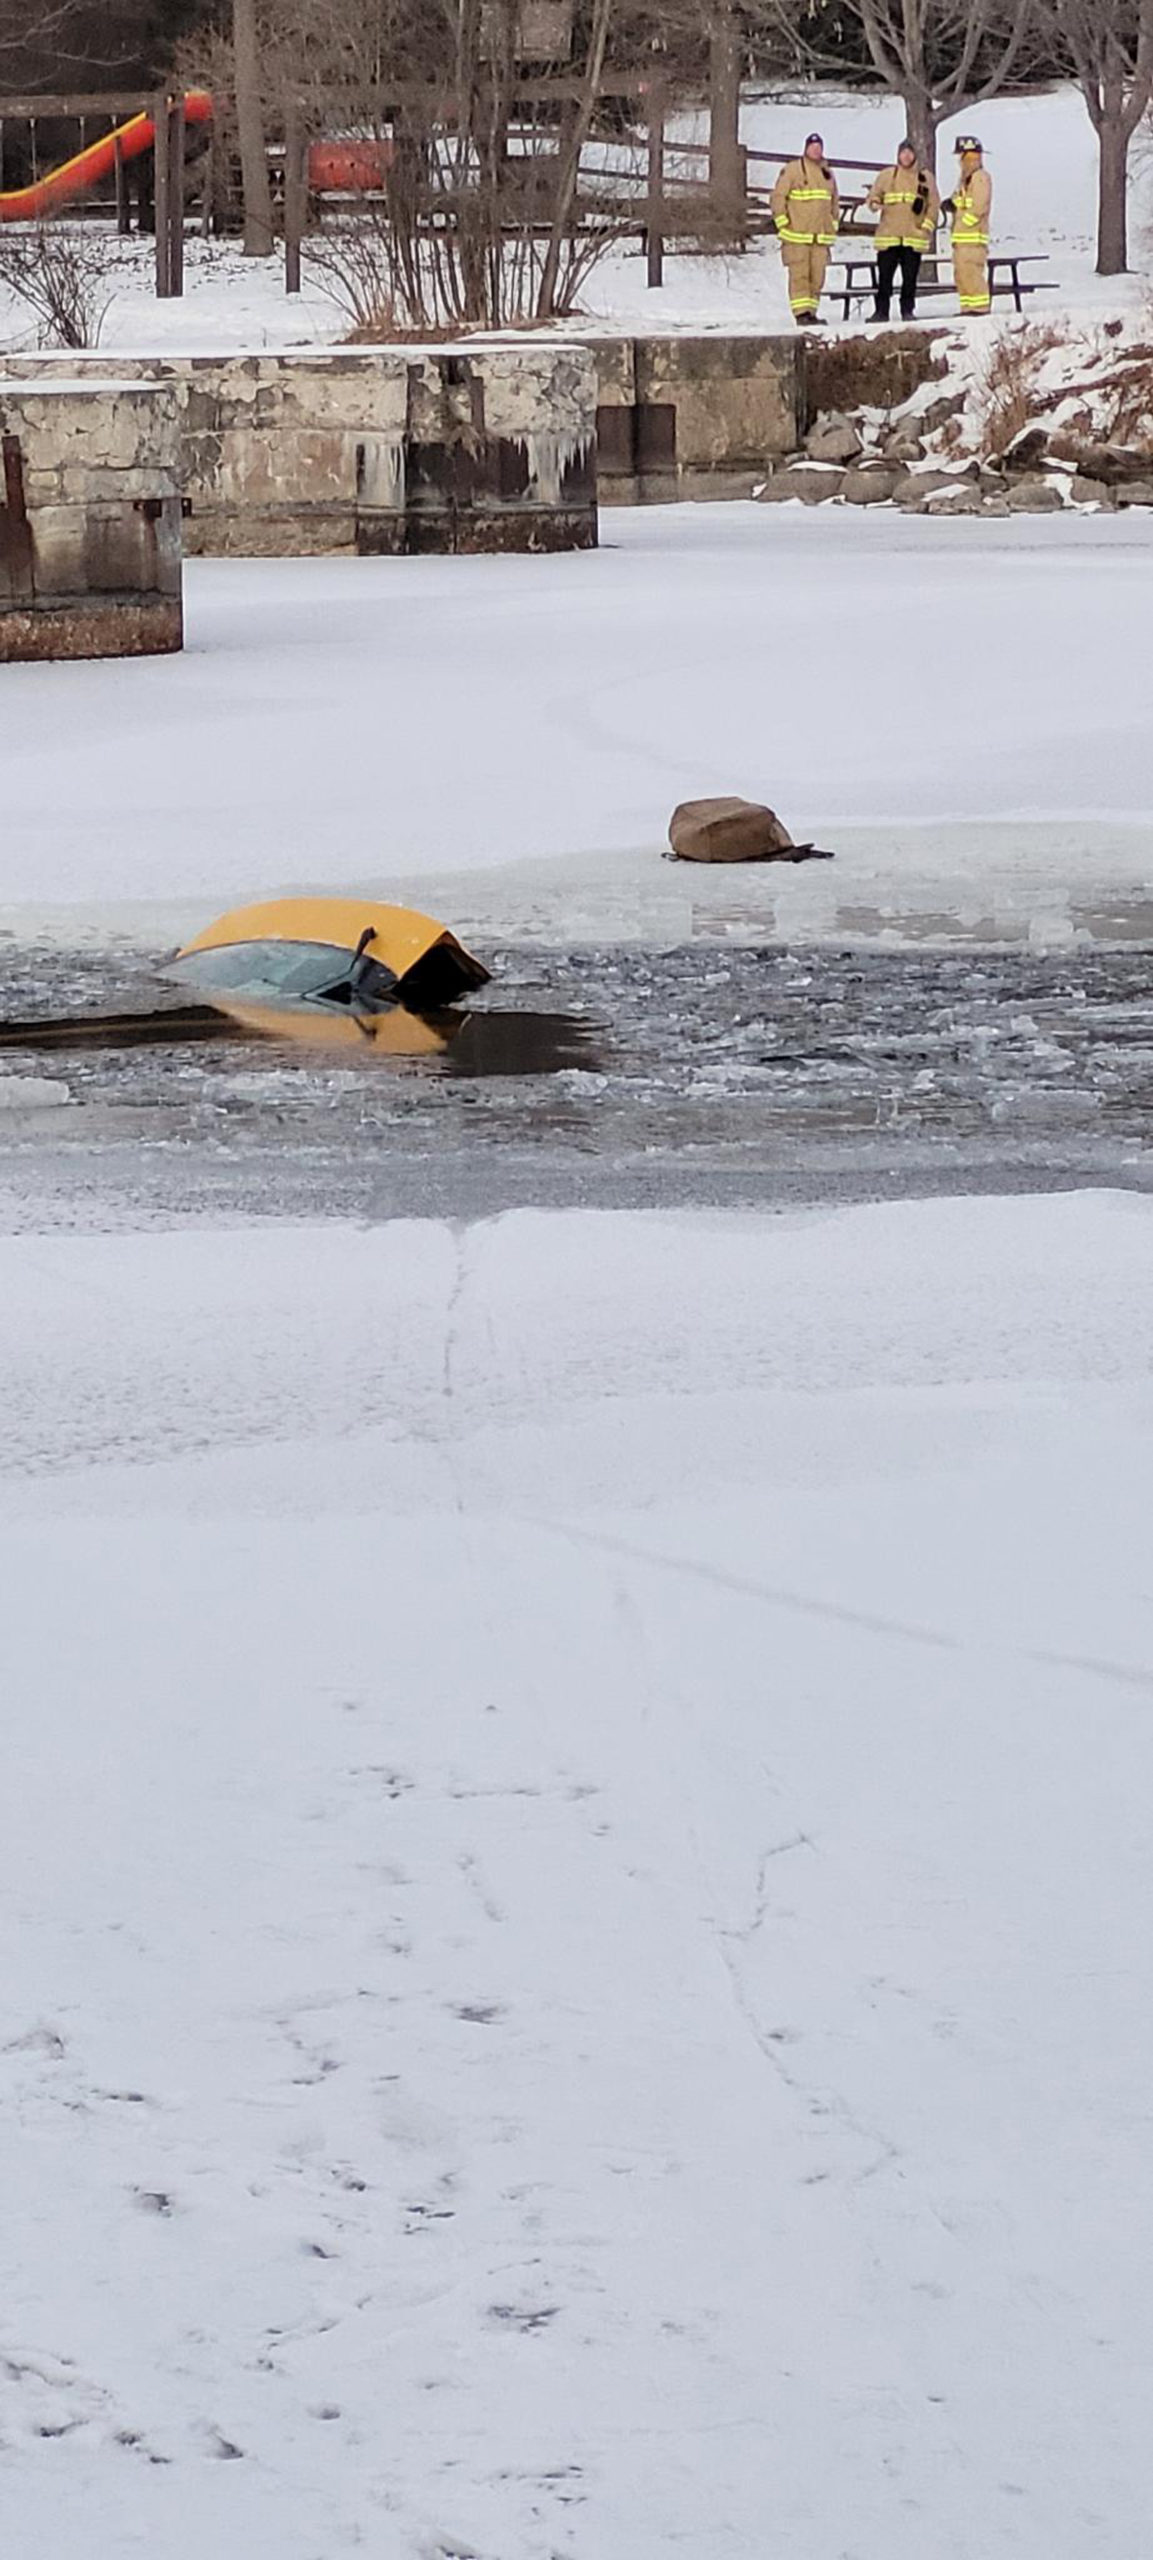 The car sank in the river after a woman drove across the frozen water. Photo credit: Ottawa Police...